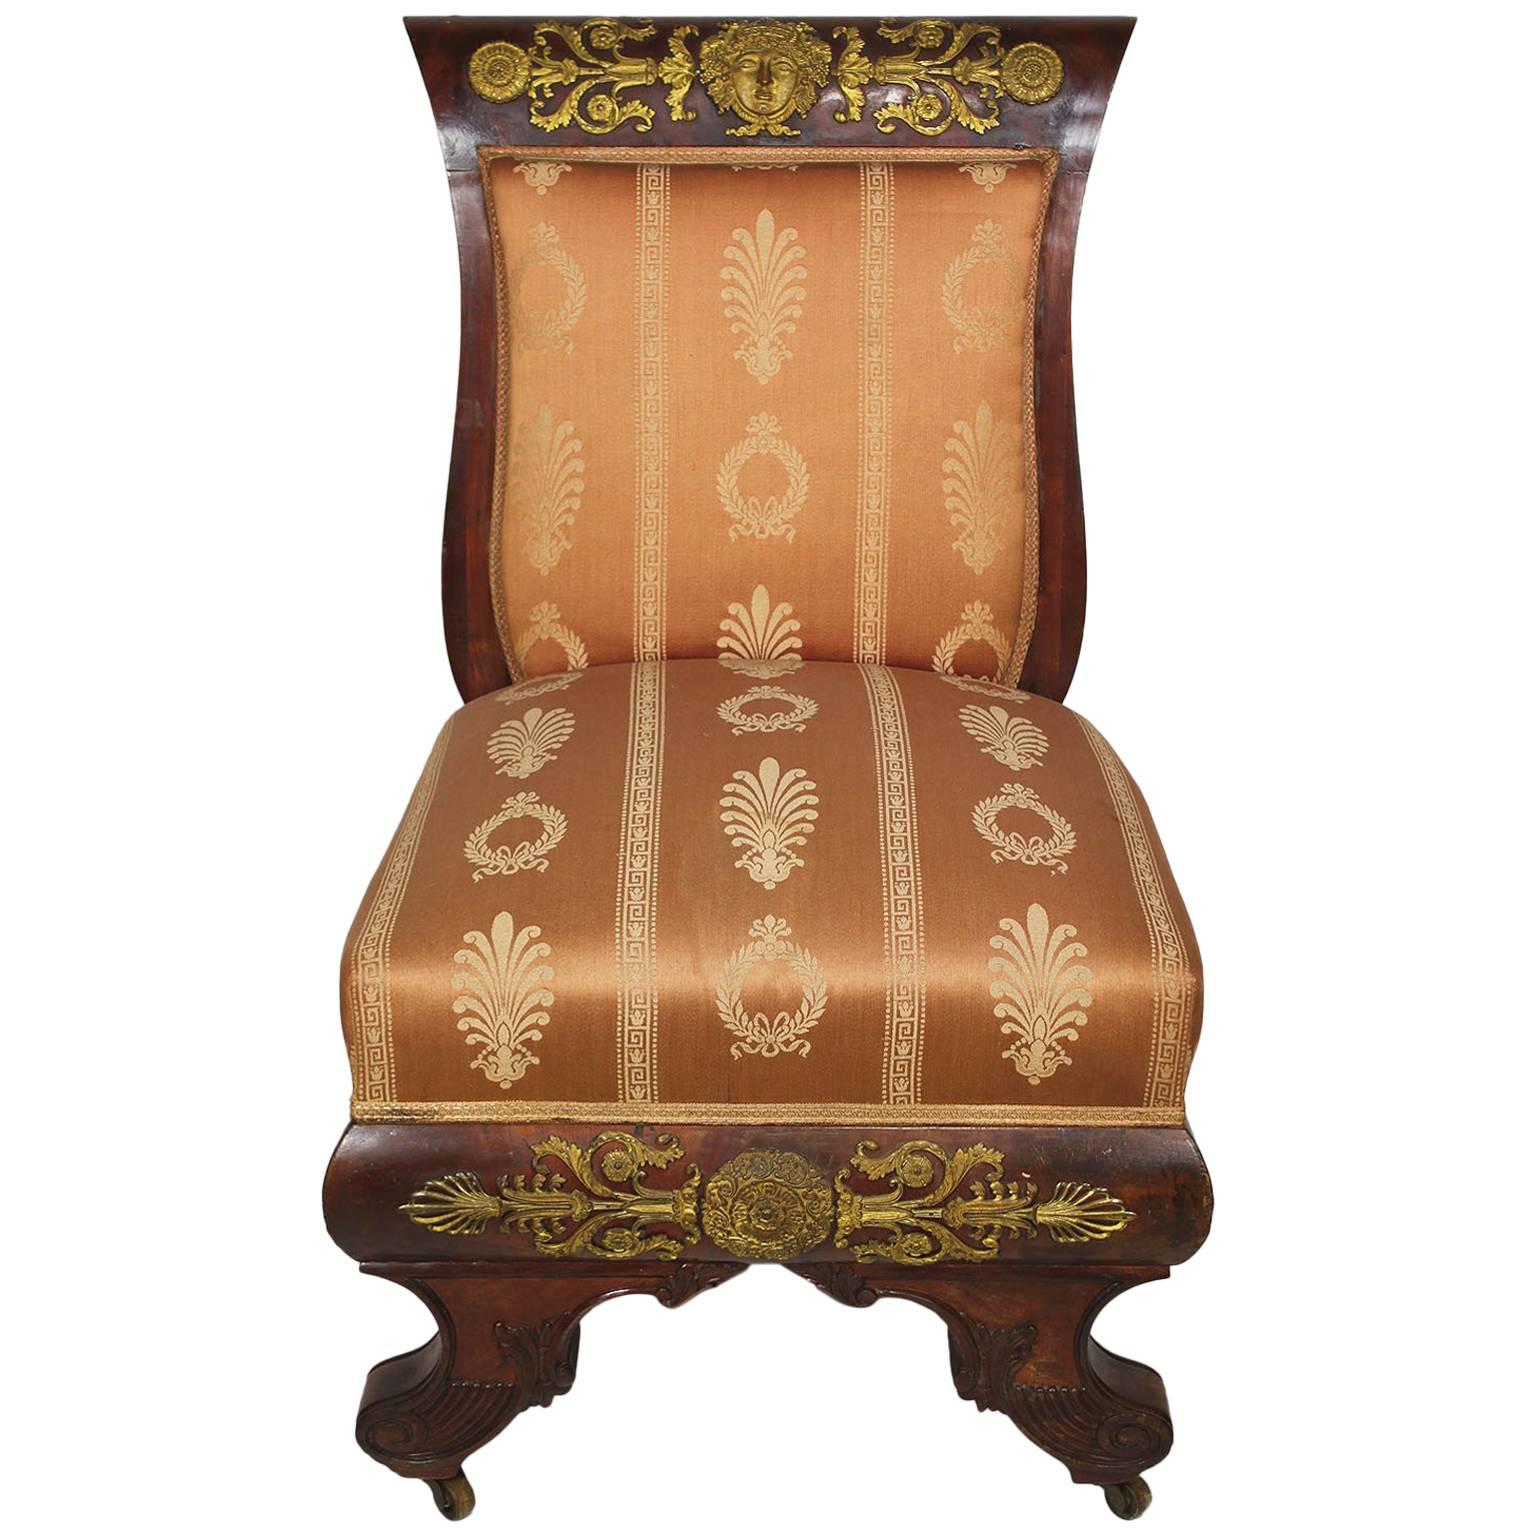 French Napoleon III Empire Mahogany and Ormolu-Mounted Low Chair, after Thomire